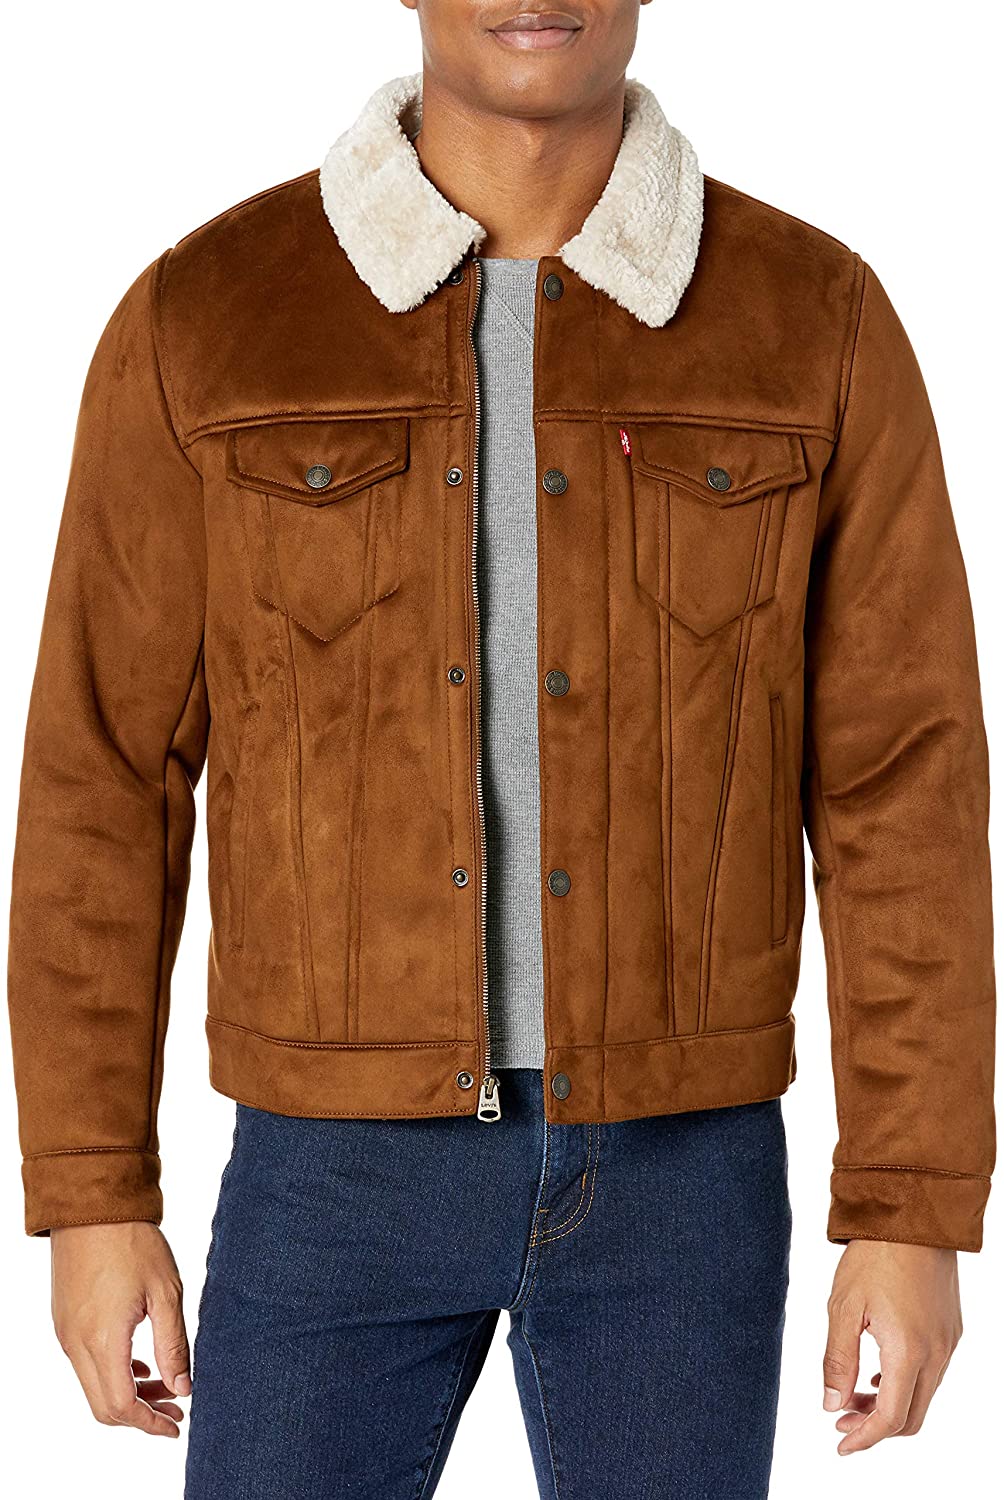 Beli Levi's® Men's Relaxed Fit Trucker Jacket| Levi's® Official Online  Store ID